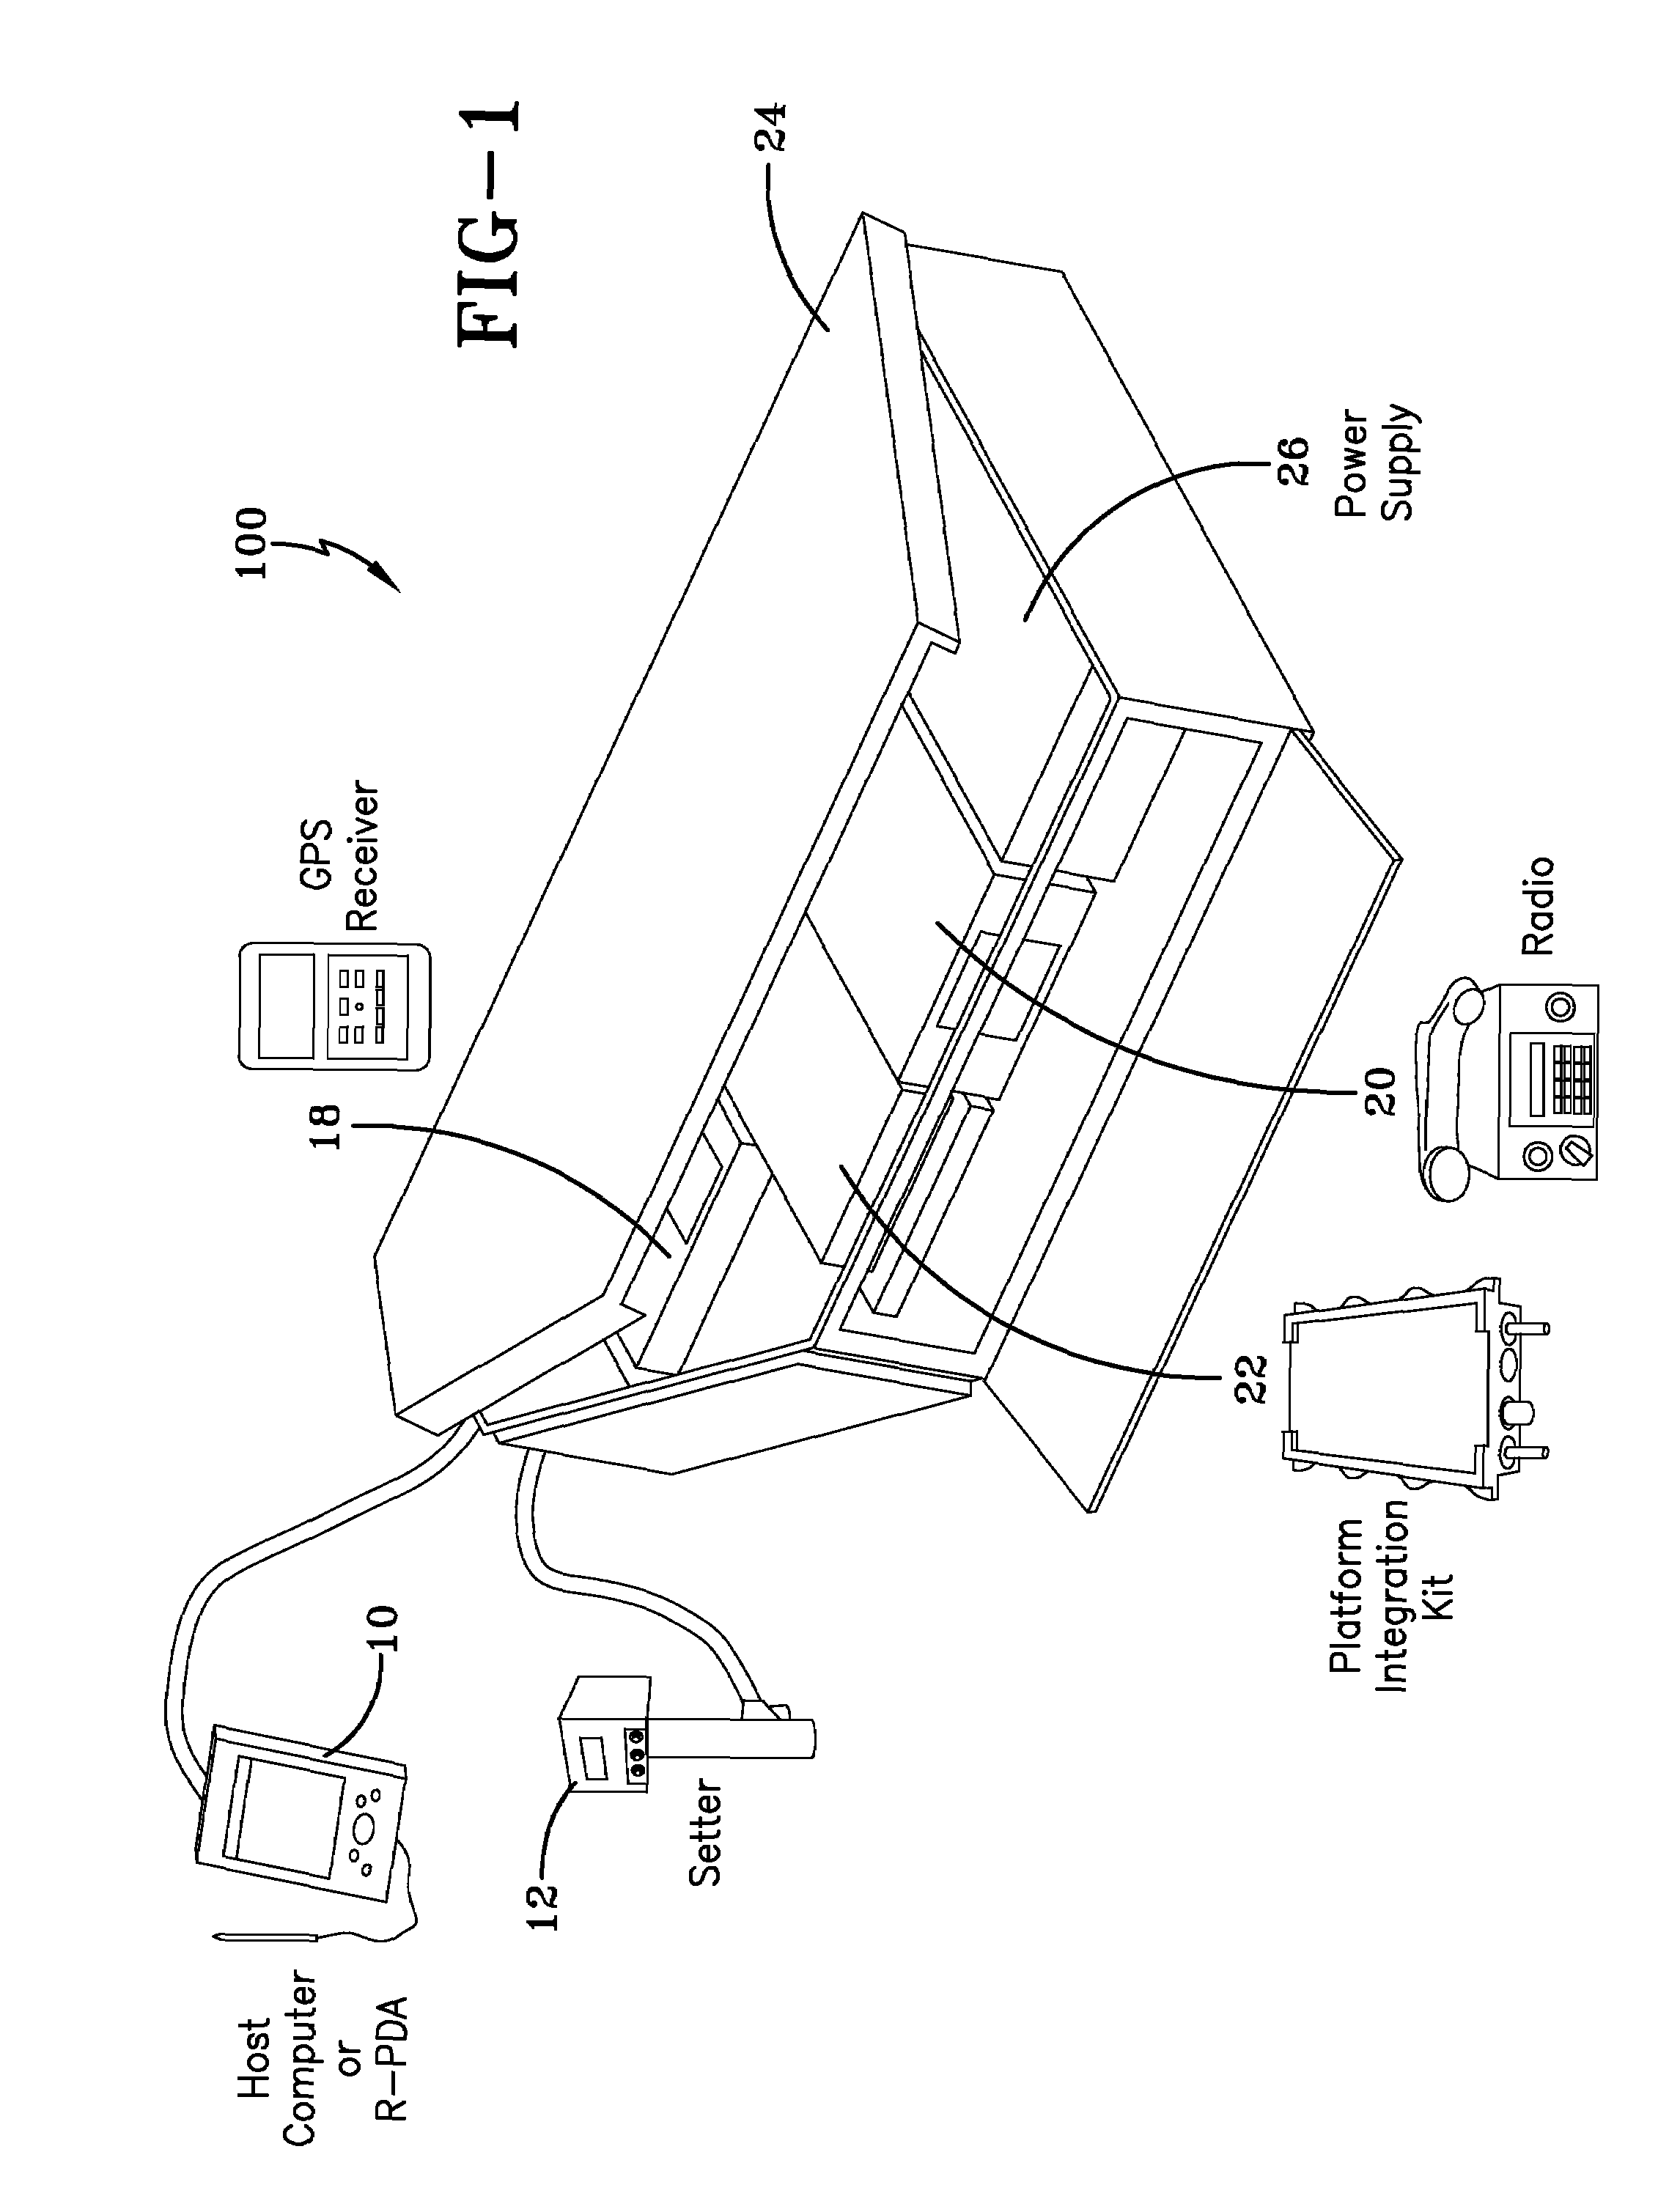 Reconfigurable fire control apparatus and method